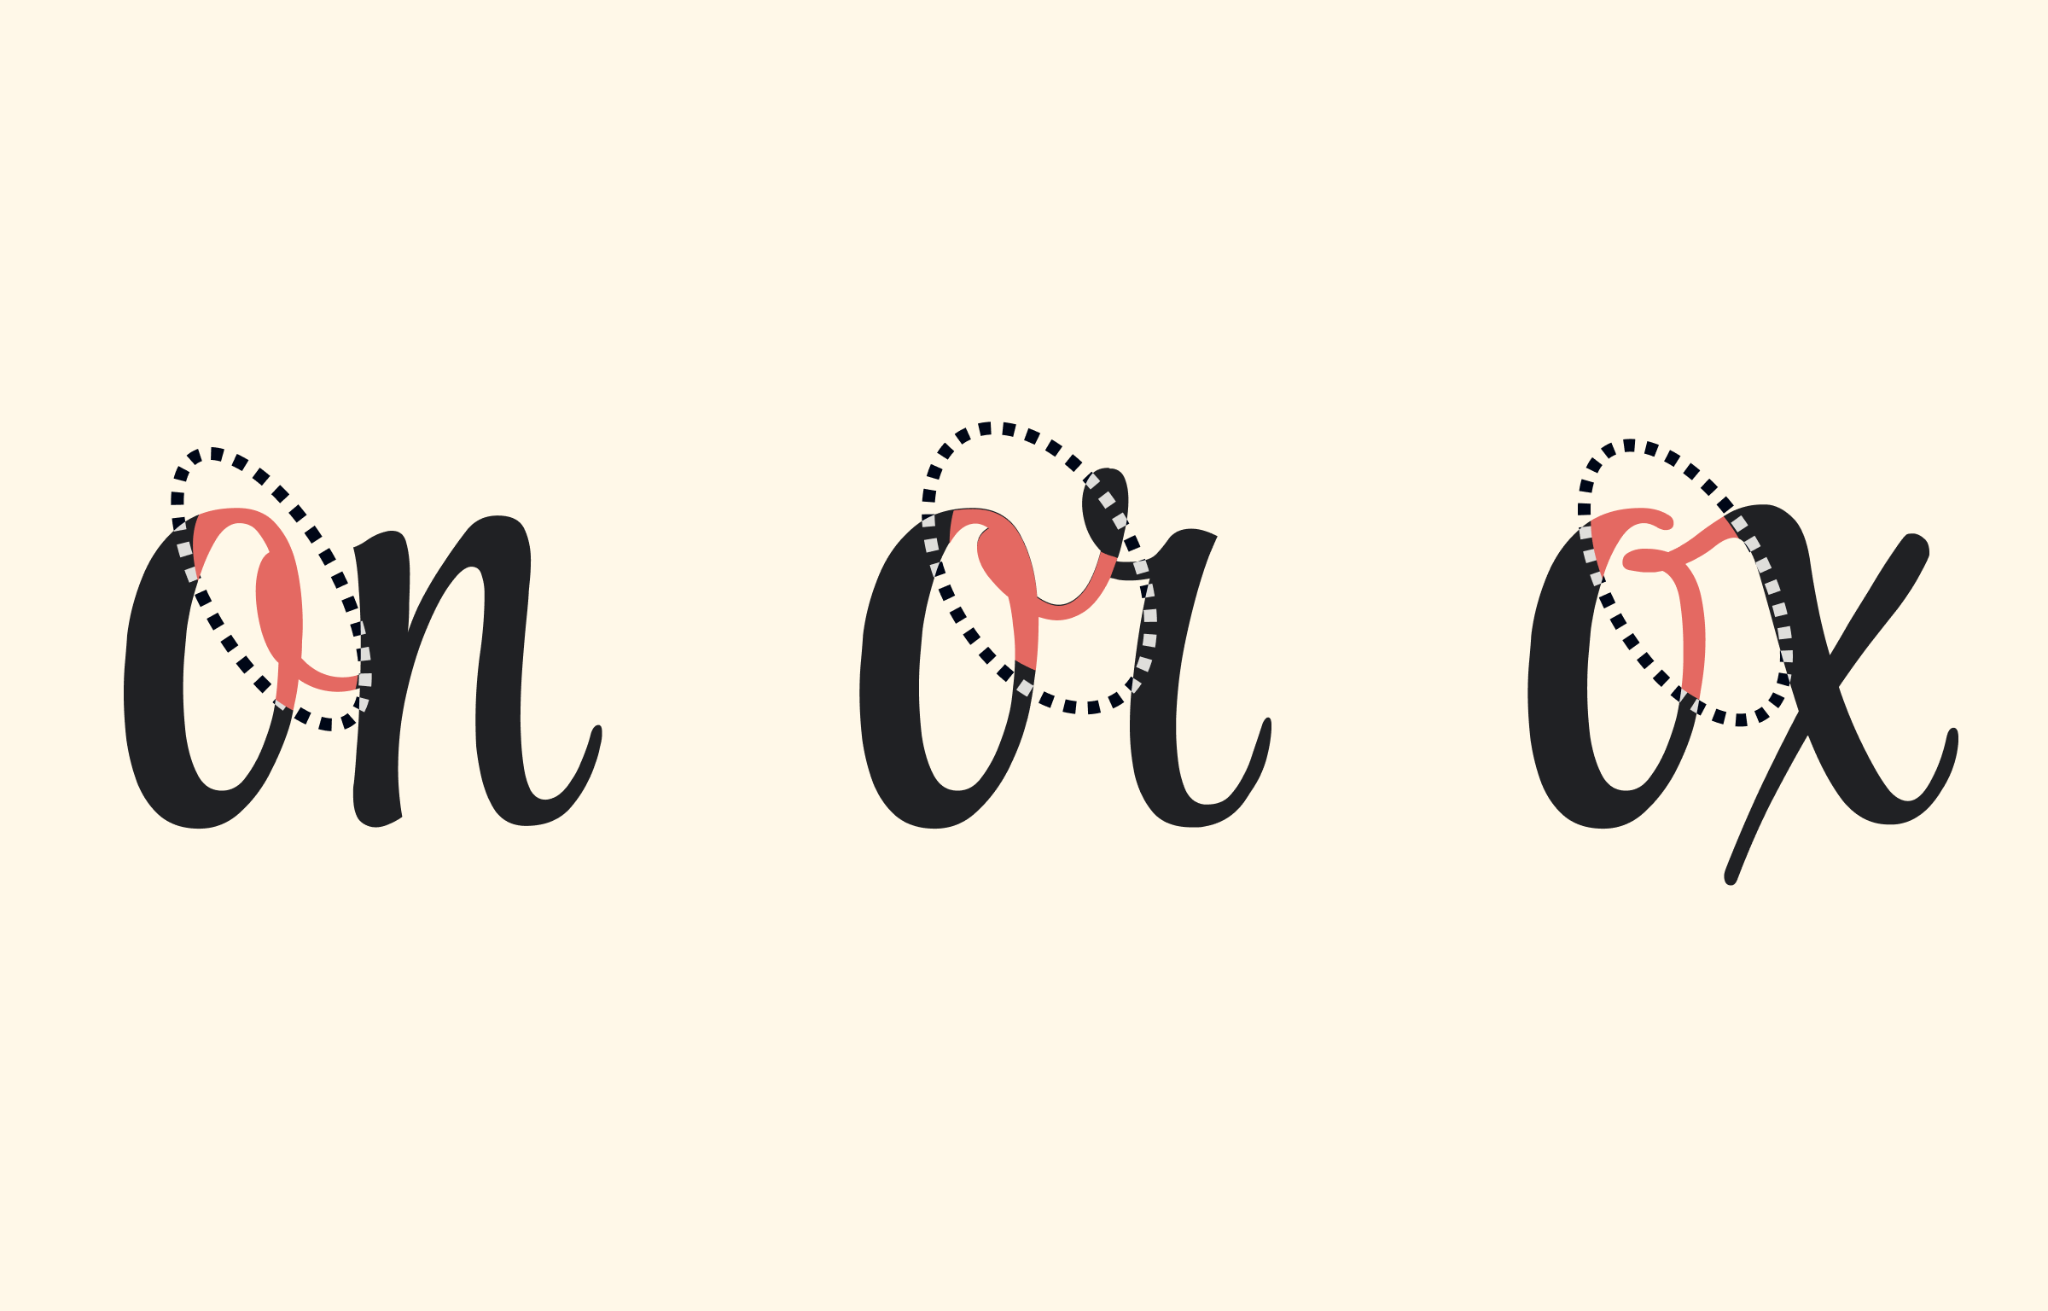 Lowercase combinations of o and n, o and r, and o and x